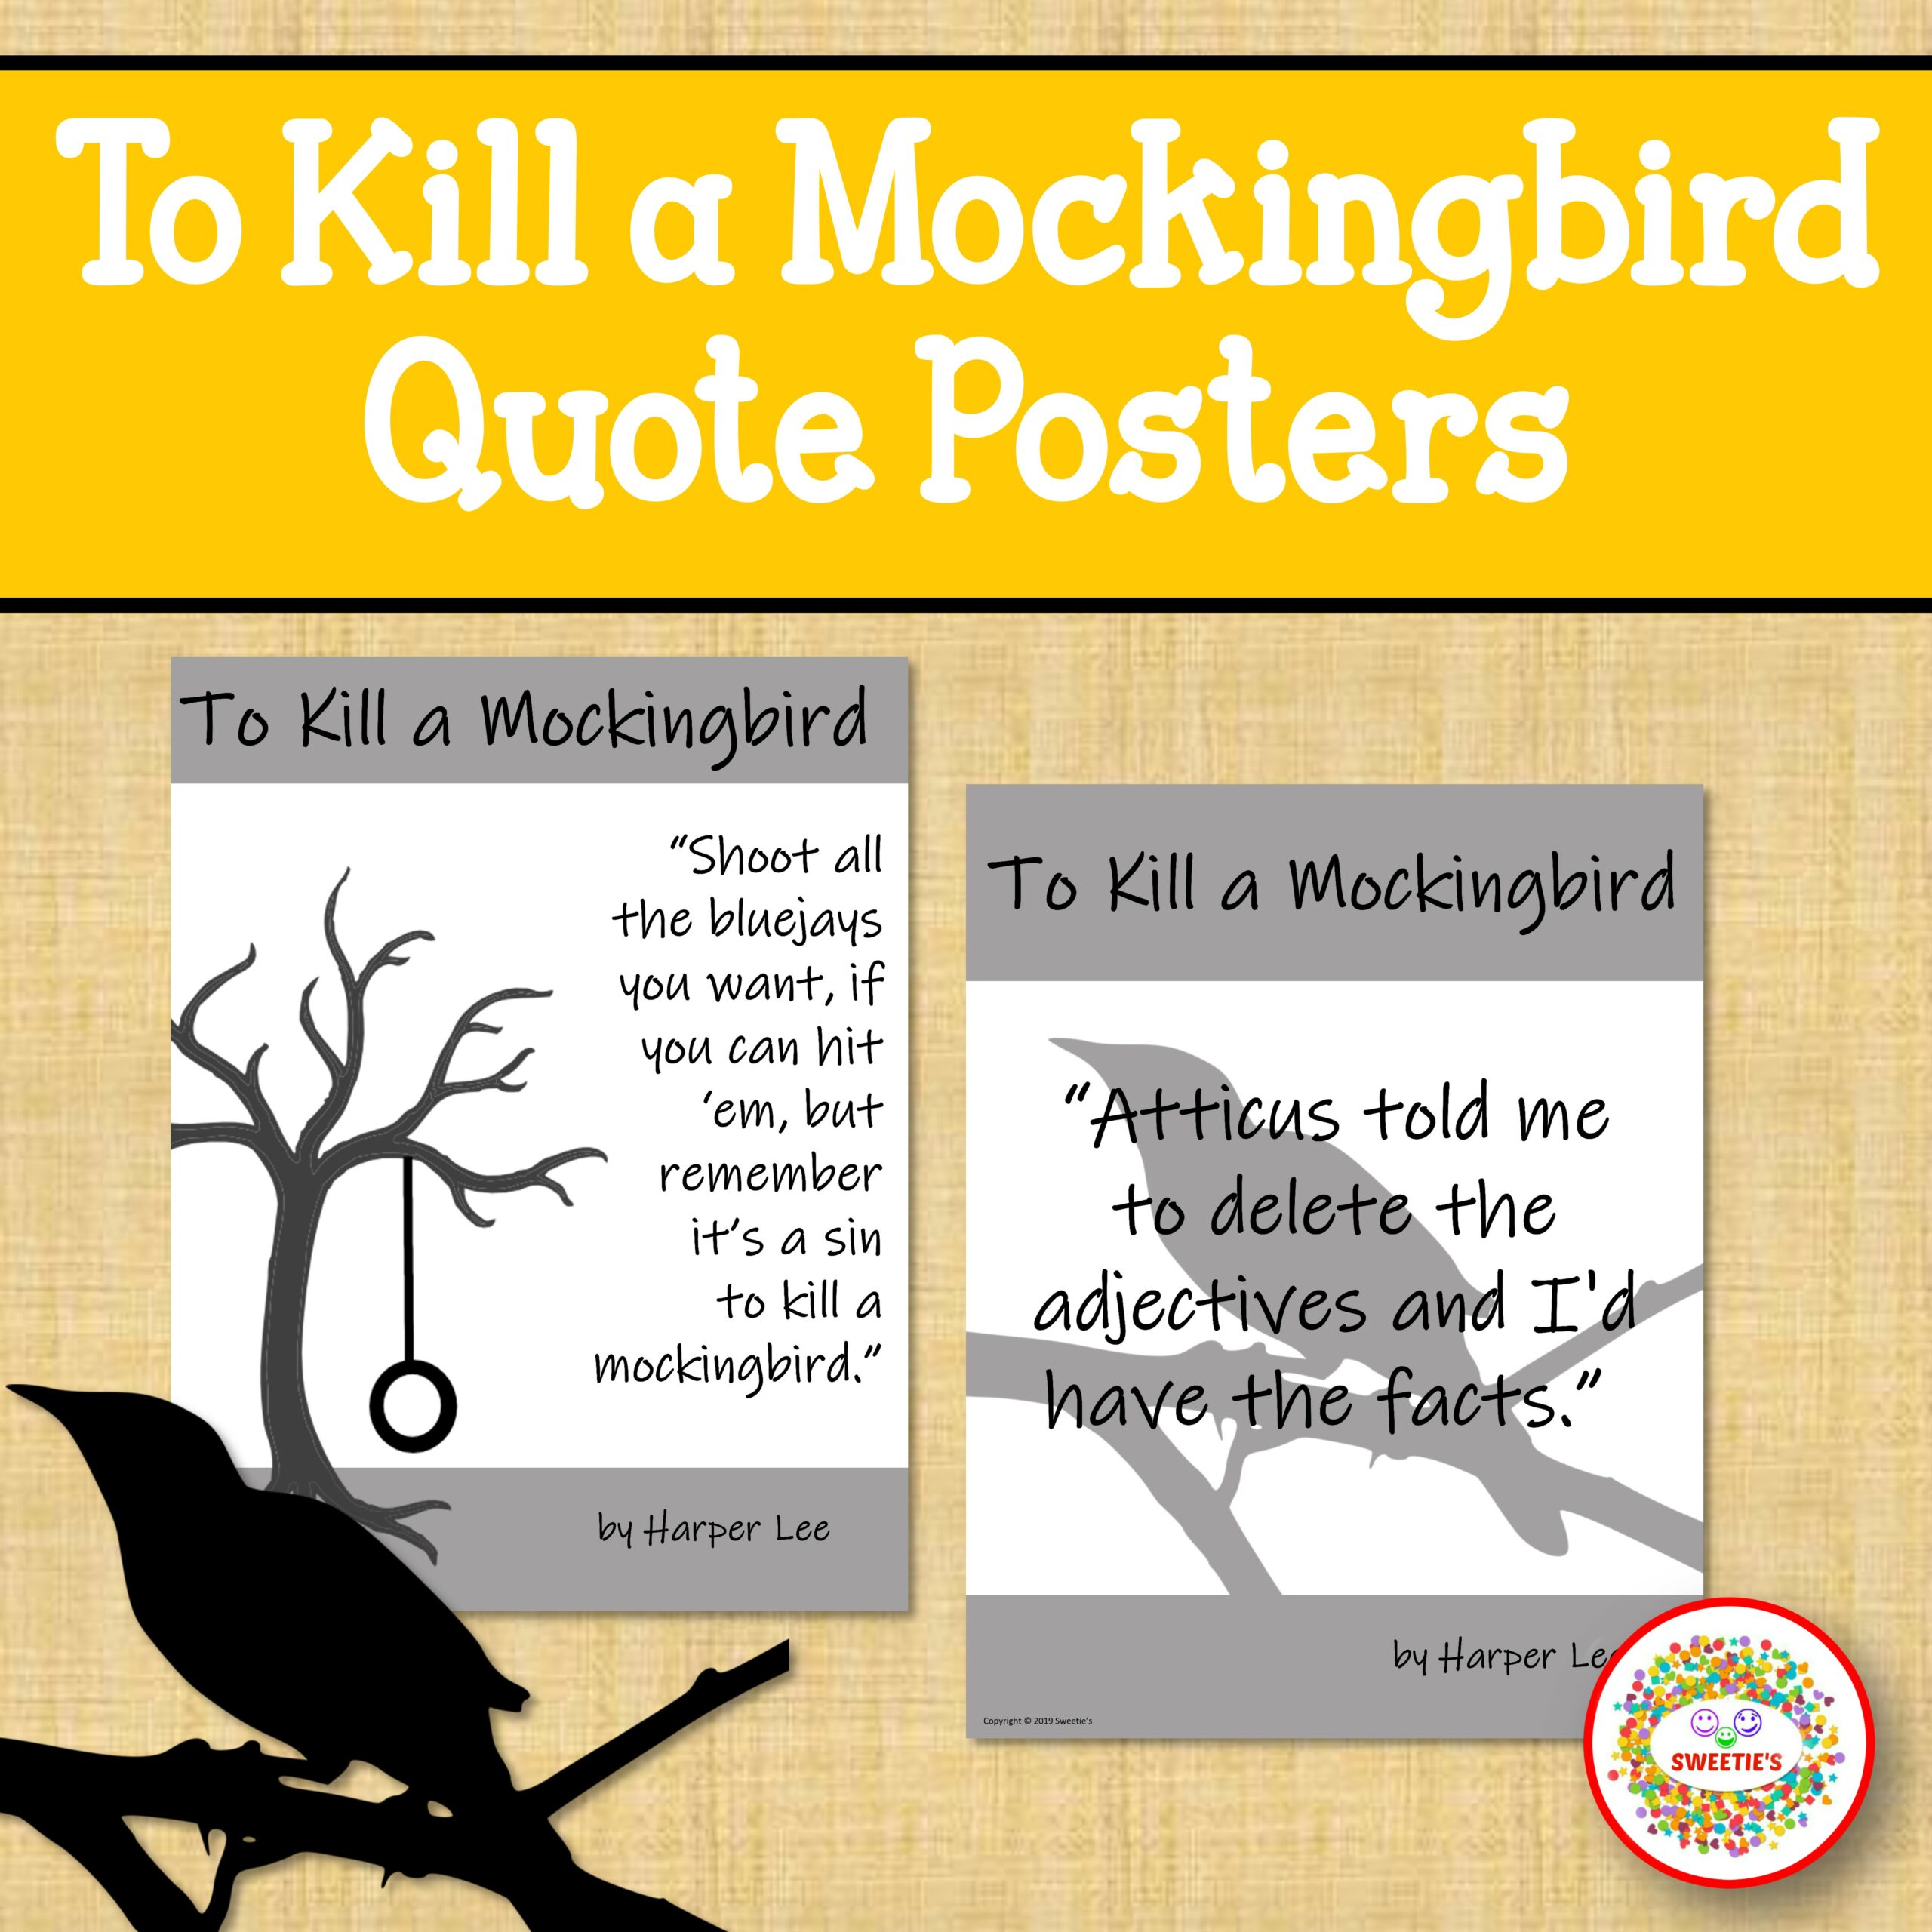 To Kill a Mockingbird Quote Posters